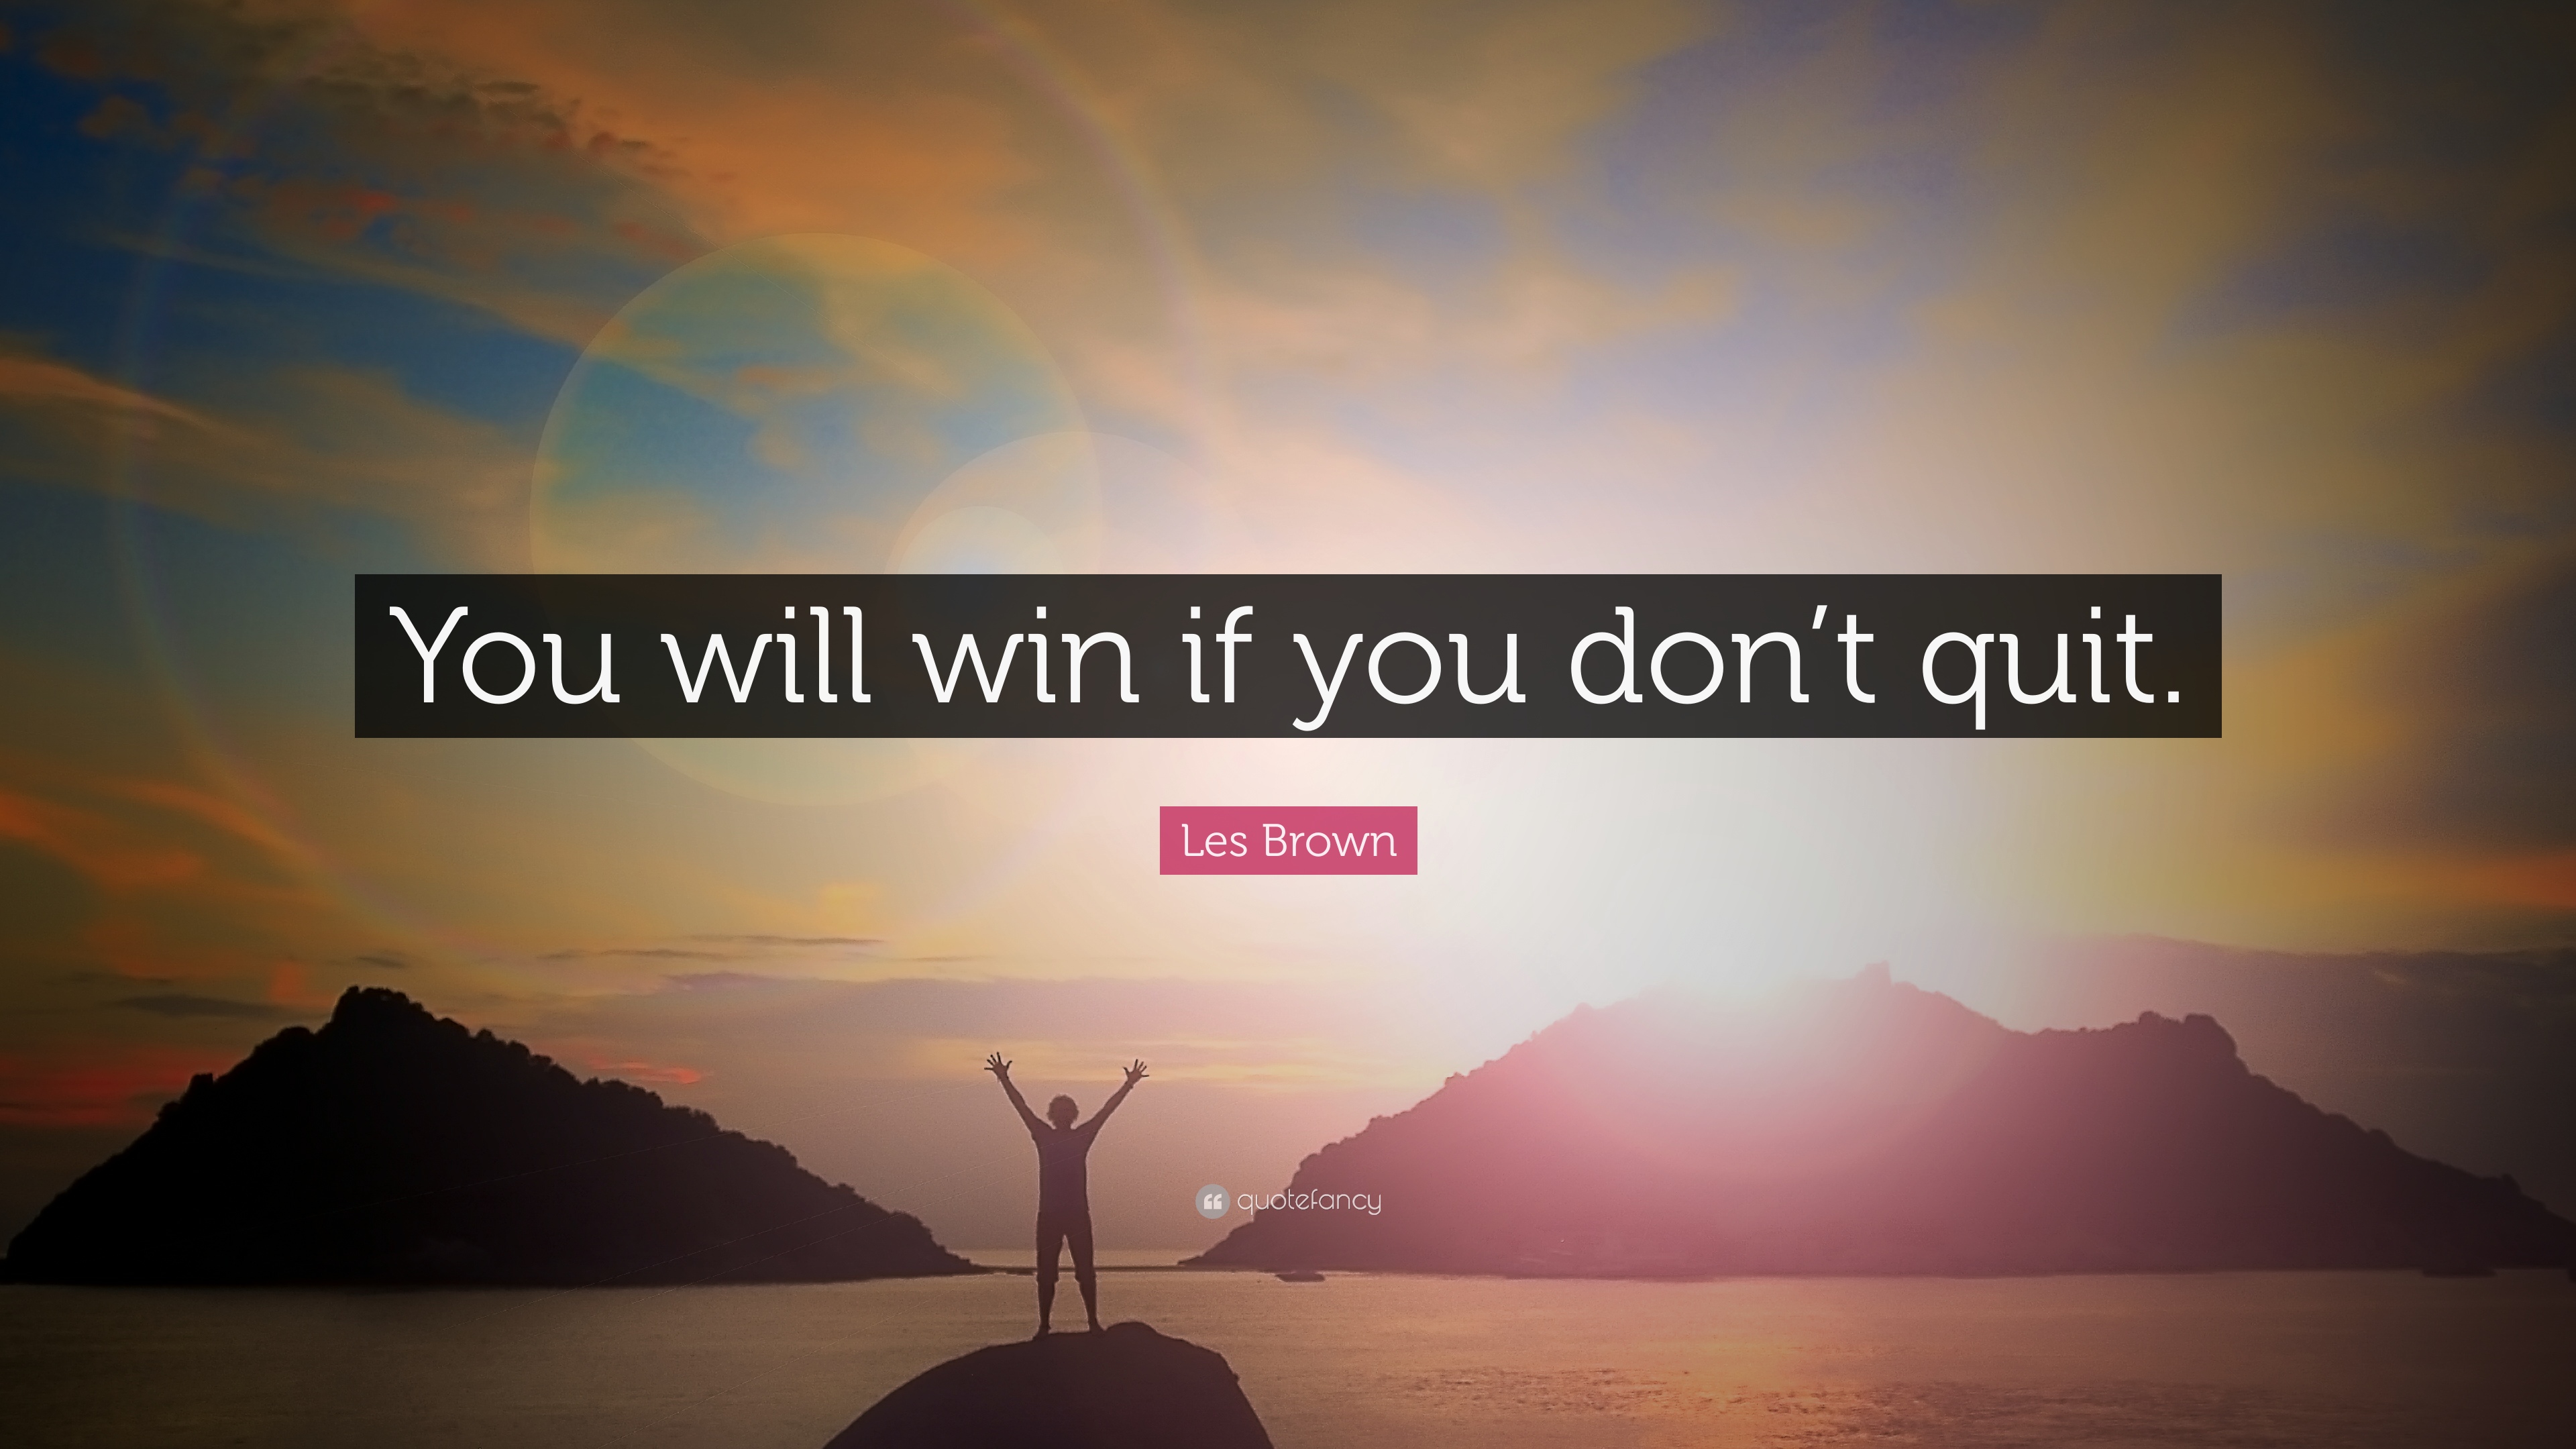 Les Brown Quote: “You will win if you don't quit.” 16